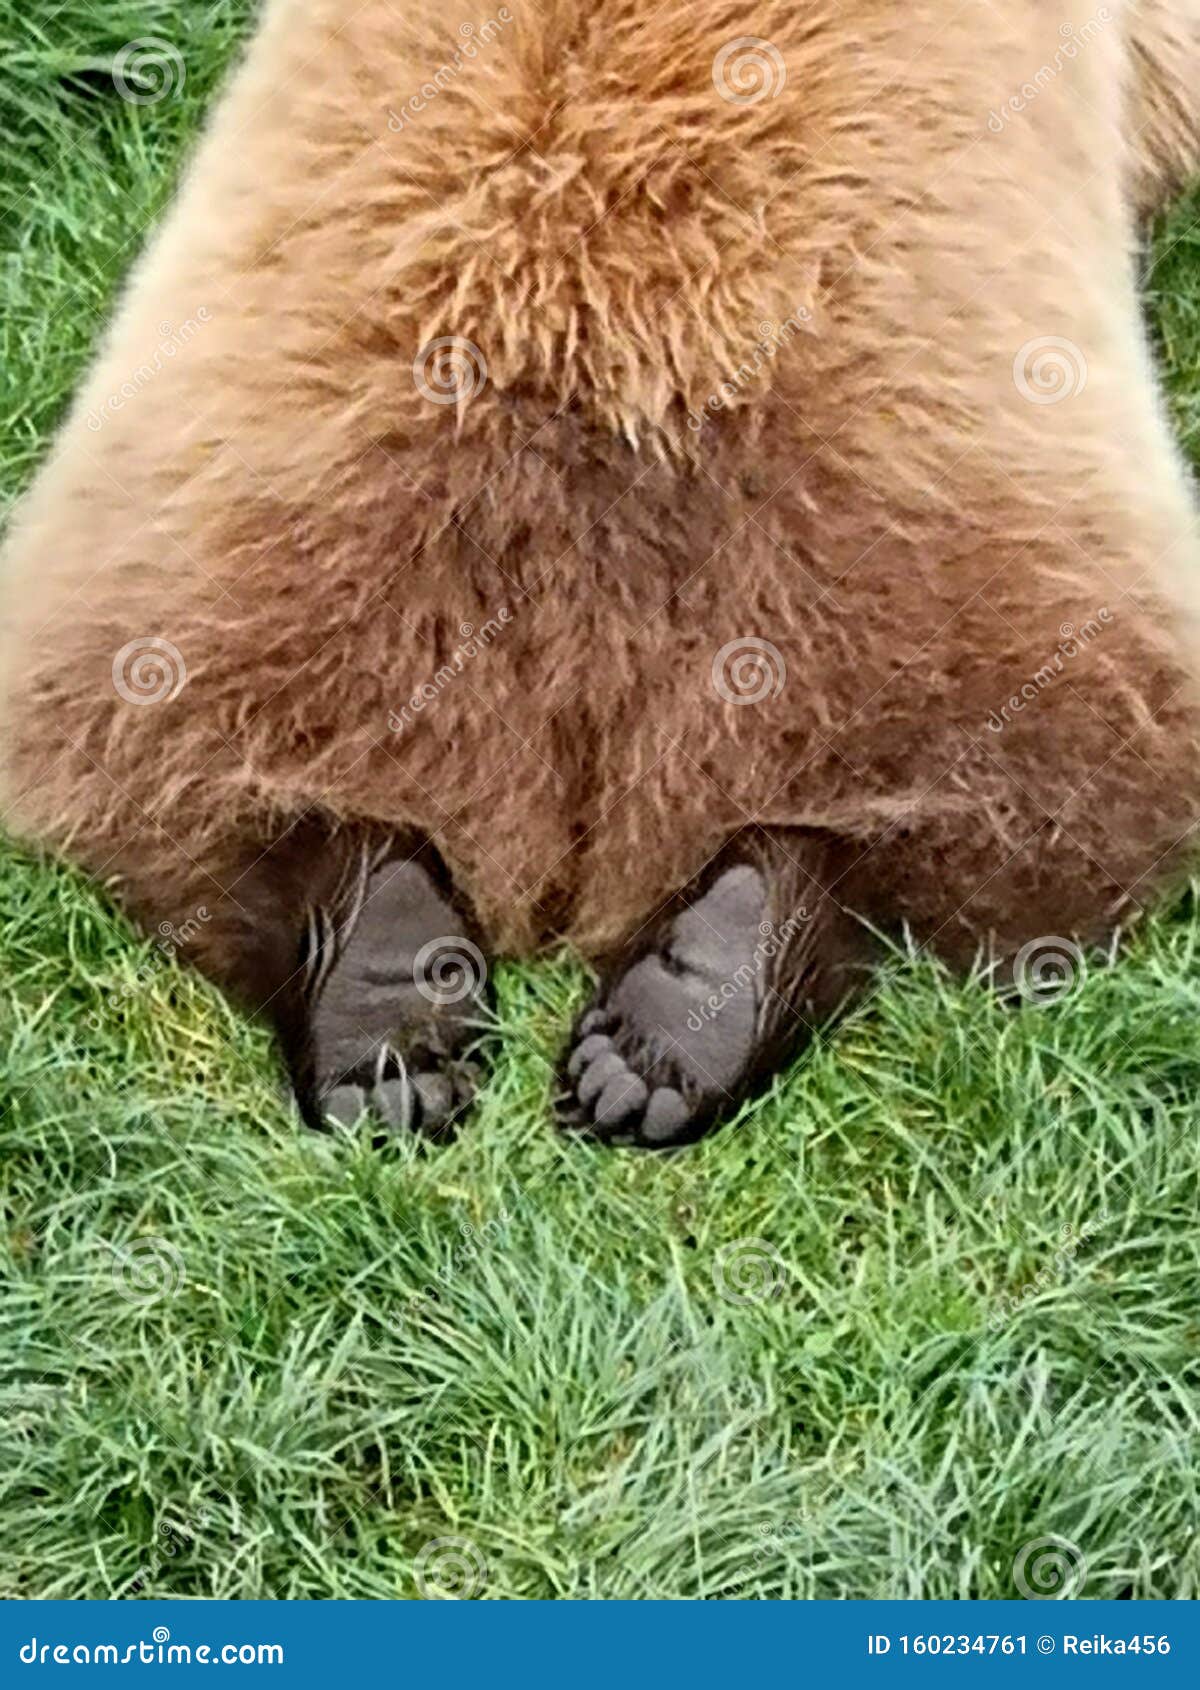 paws of a brownbear, backside